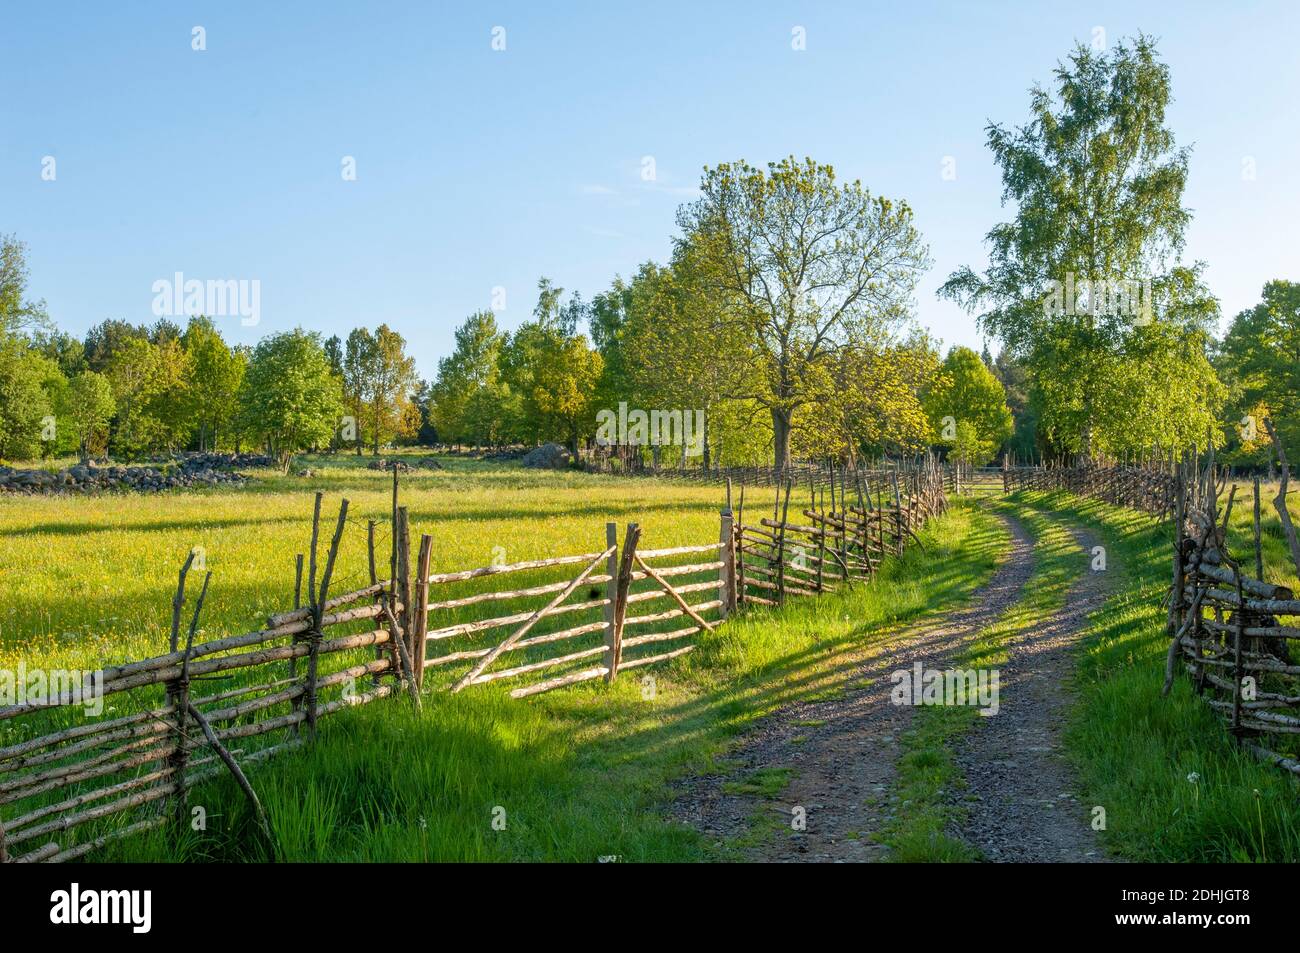 A small winding cattle path and field fences in a culture landscape, Östergötland, Sweden Stock Photo